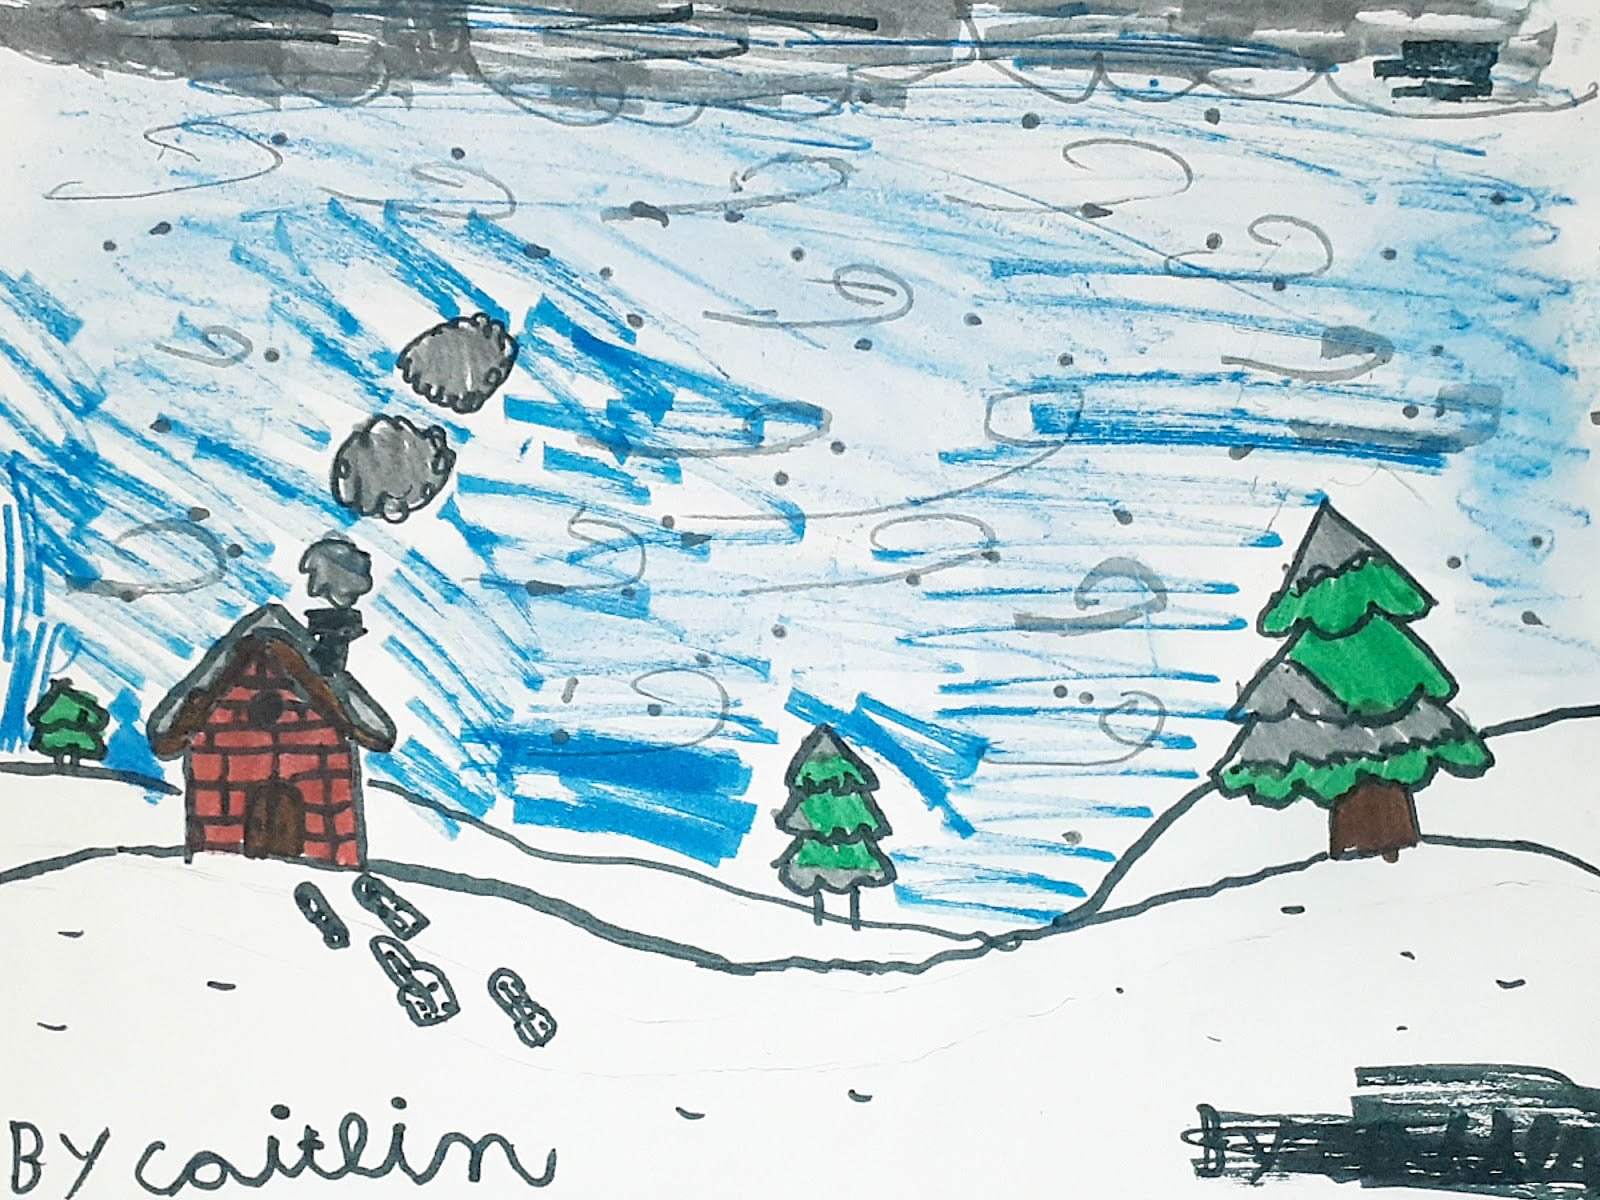 Artwork by Caitlin, Age 10 from Fredericton